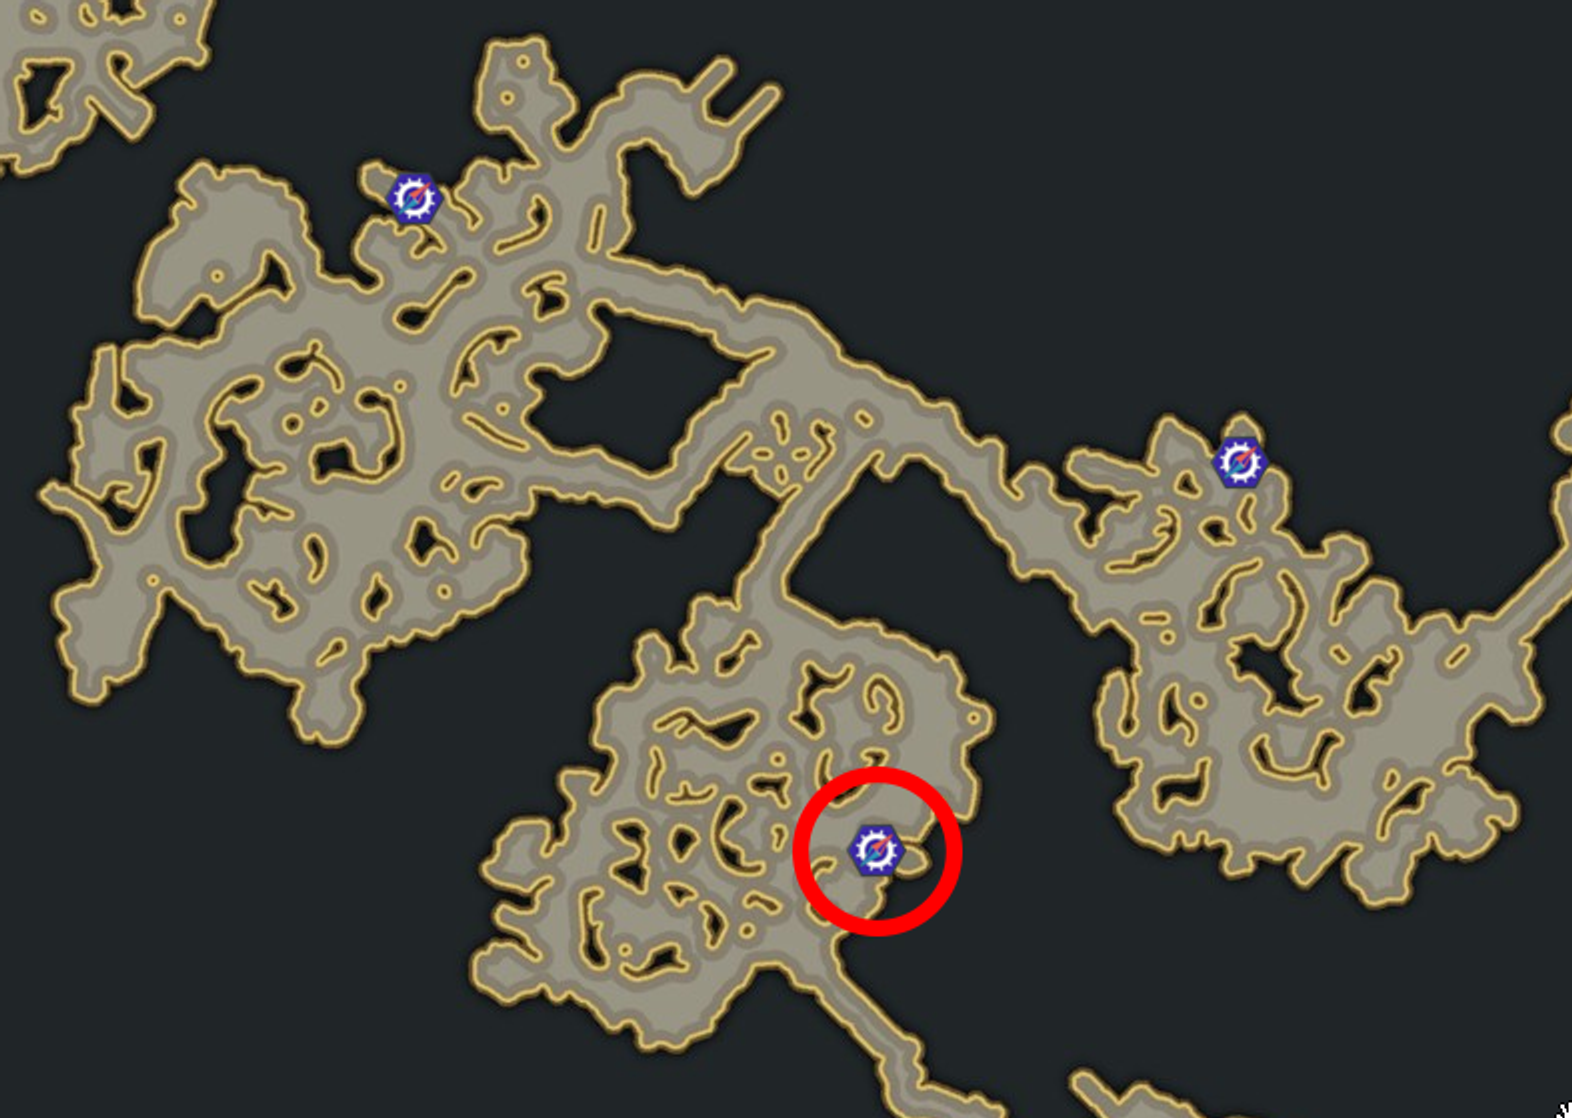 verger-poiriers-lost-ark-map-emplacement